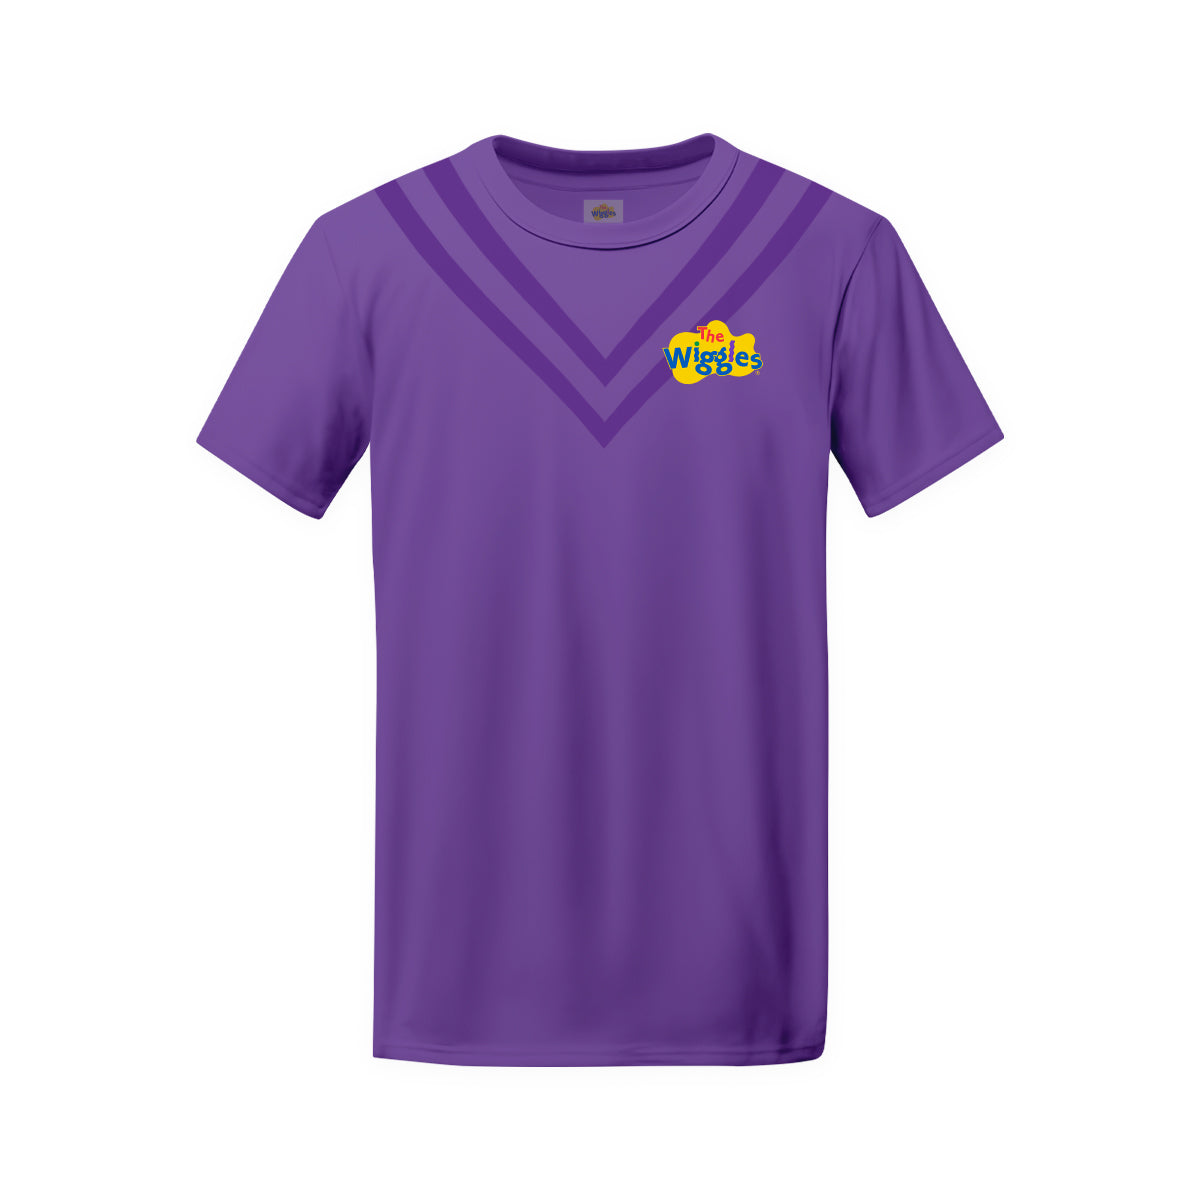 The Wiggles Childrens Costume T-shirt